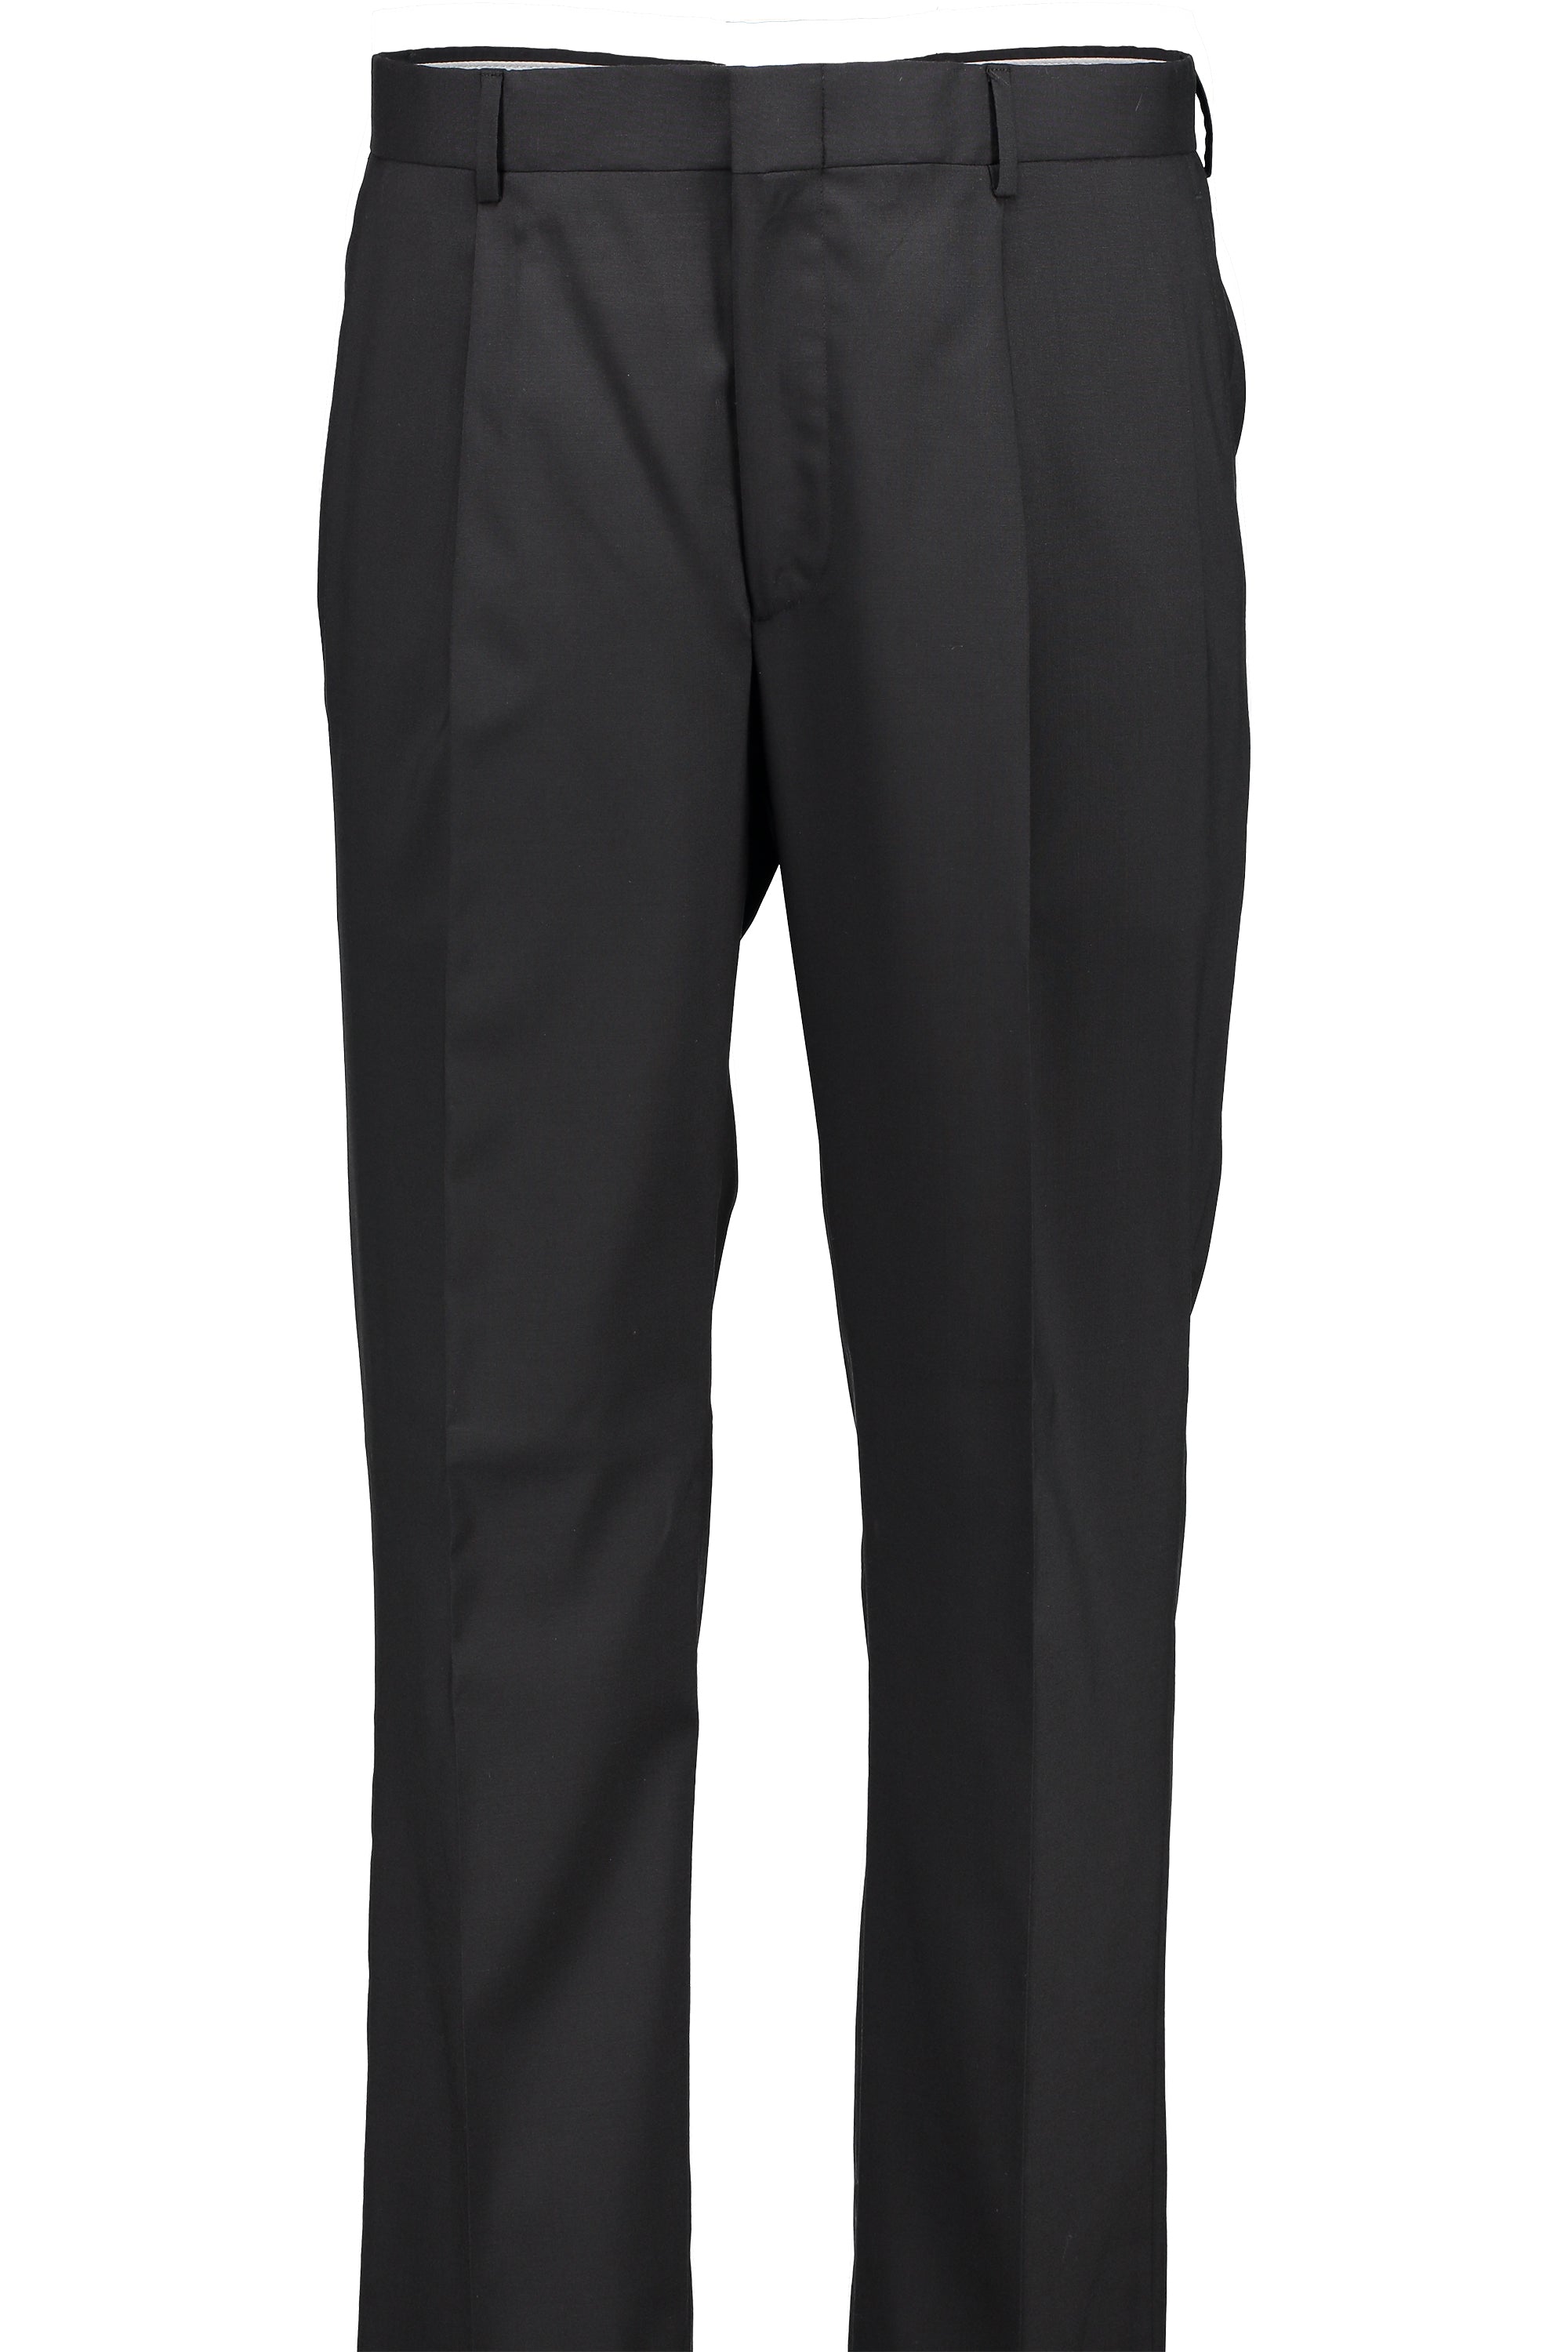 Y#39;s For Men Black Pleated Trousers